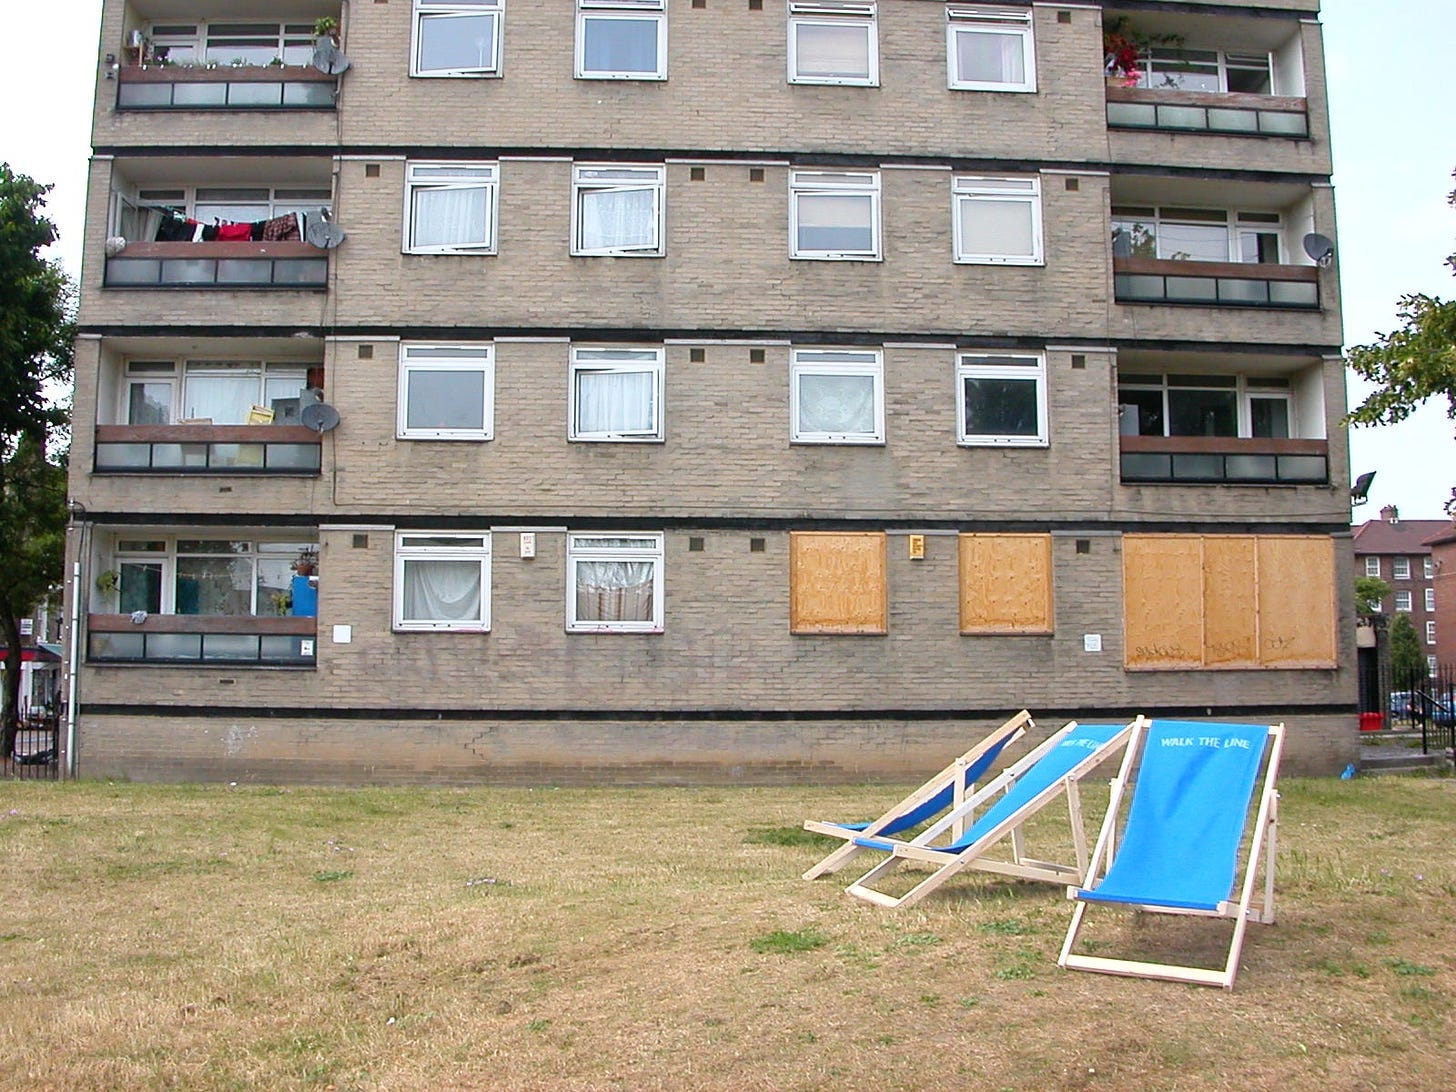 A tower block in East London, with one apartment's windows boarded up. Outside, on brown brittle grass, are three blue reclining cloth chairs with the words "Walk the Line".